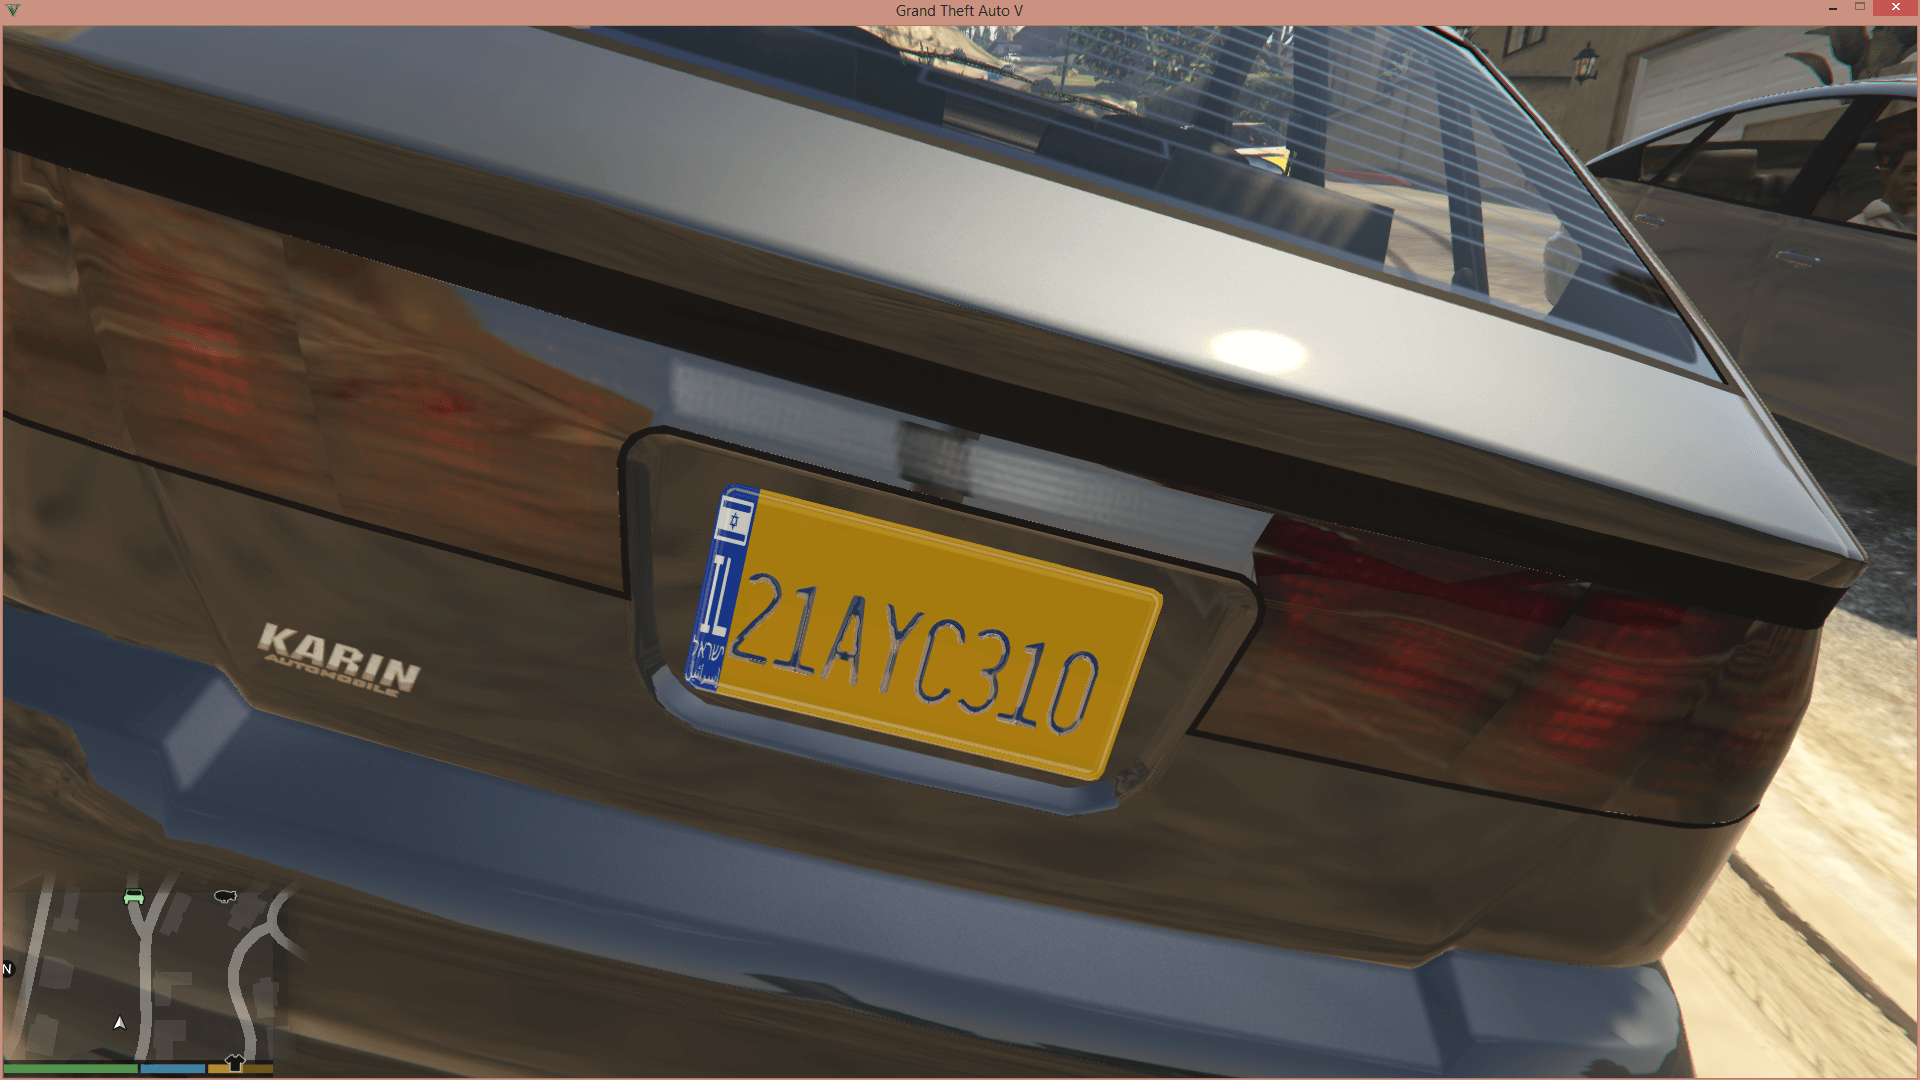 Gta online custom license plate pc topscout